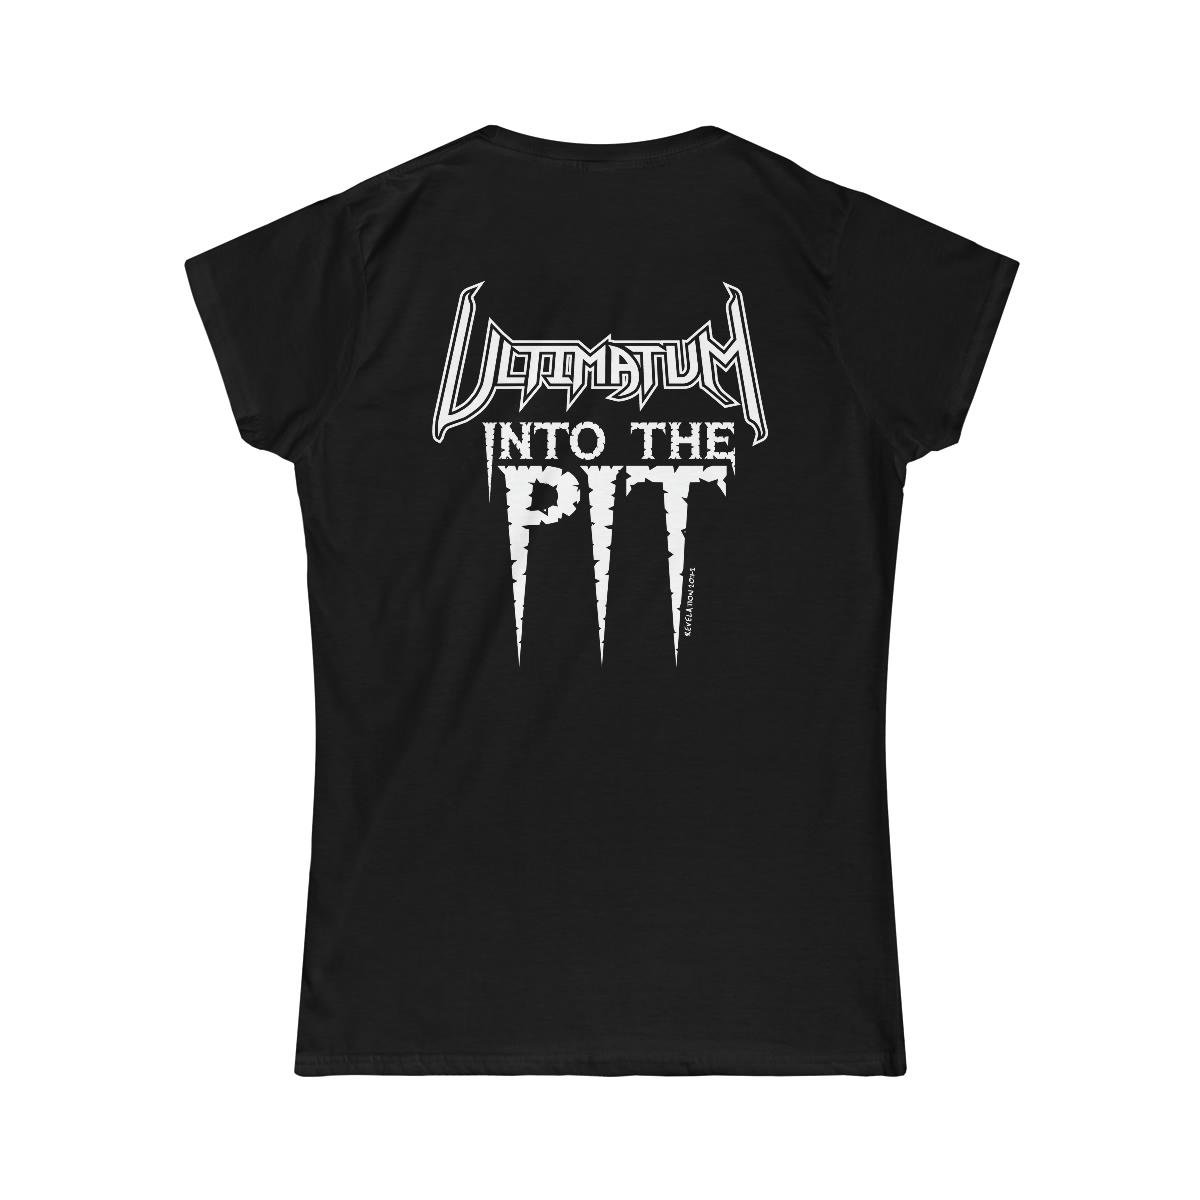 Ultimatum – Into the Pit Women’s Short Sleeve Tshirt (2 Sided)